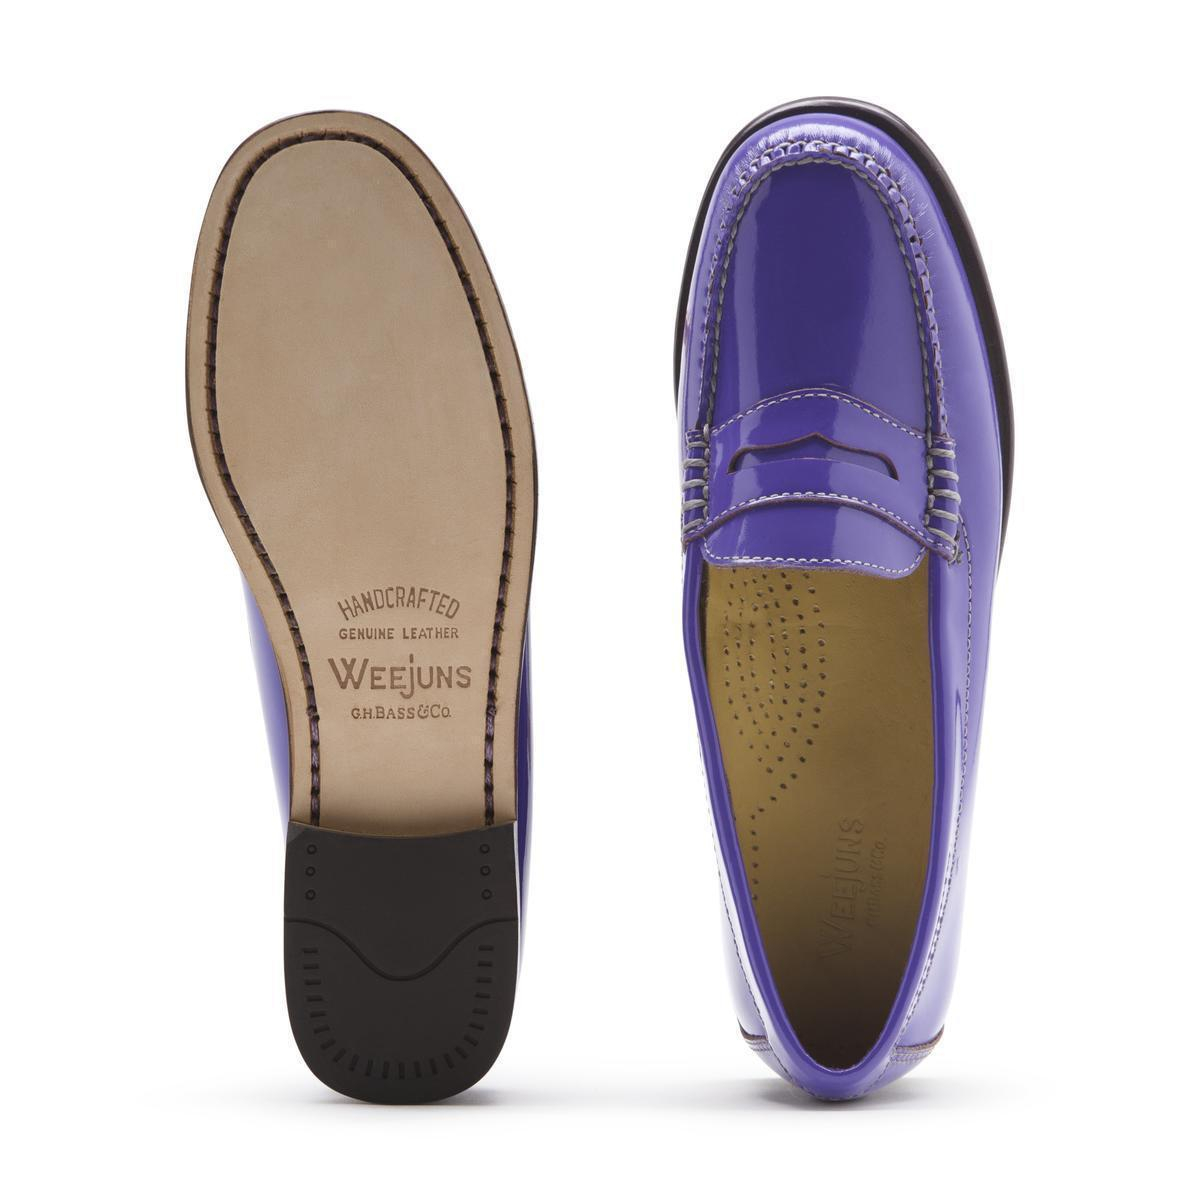 Lyst - G.H. Bass & Co. Patent Penny Loafer in Purple